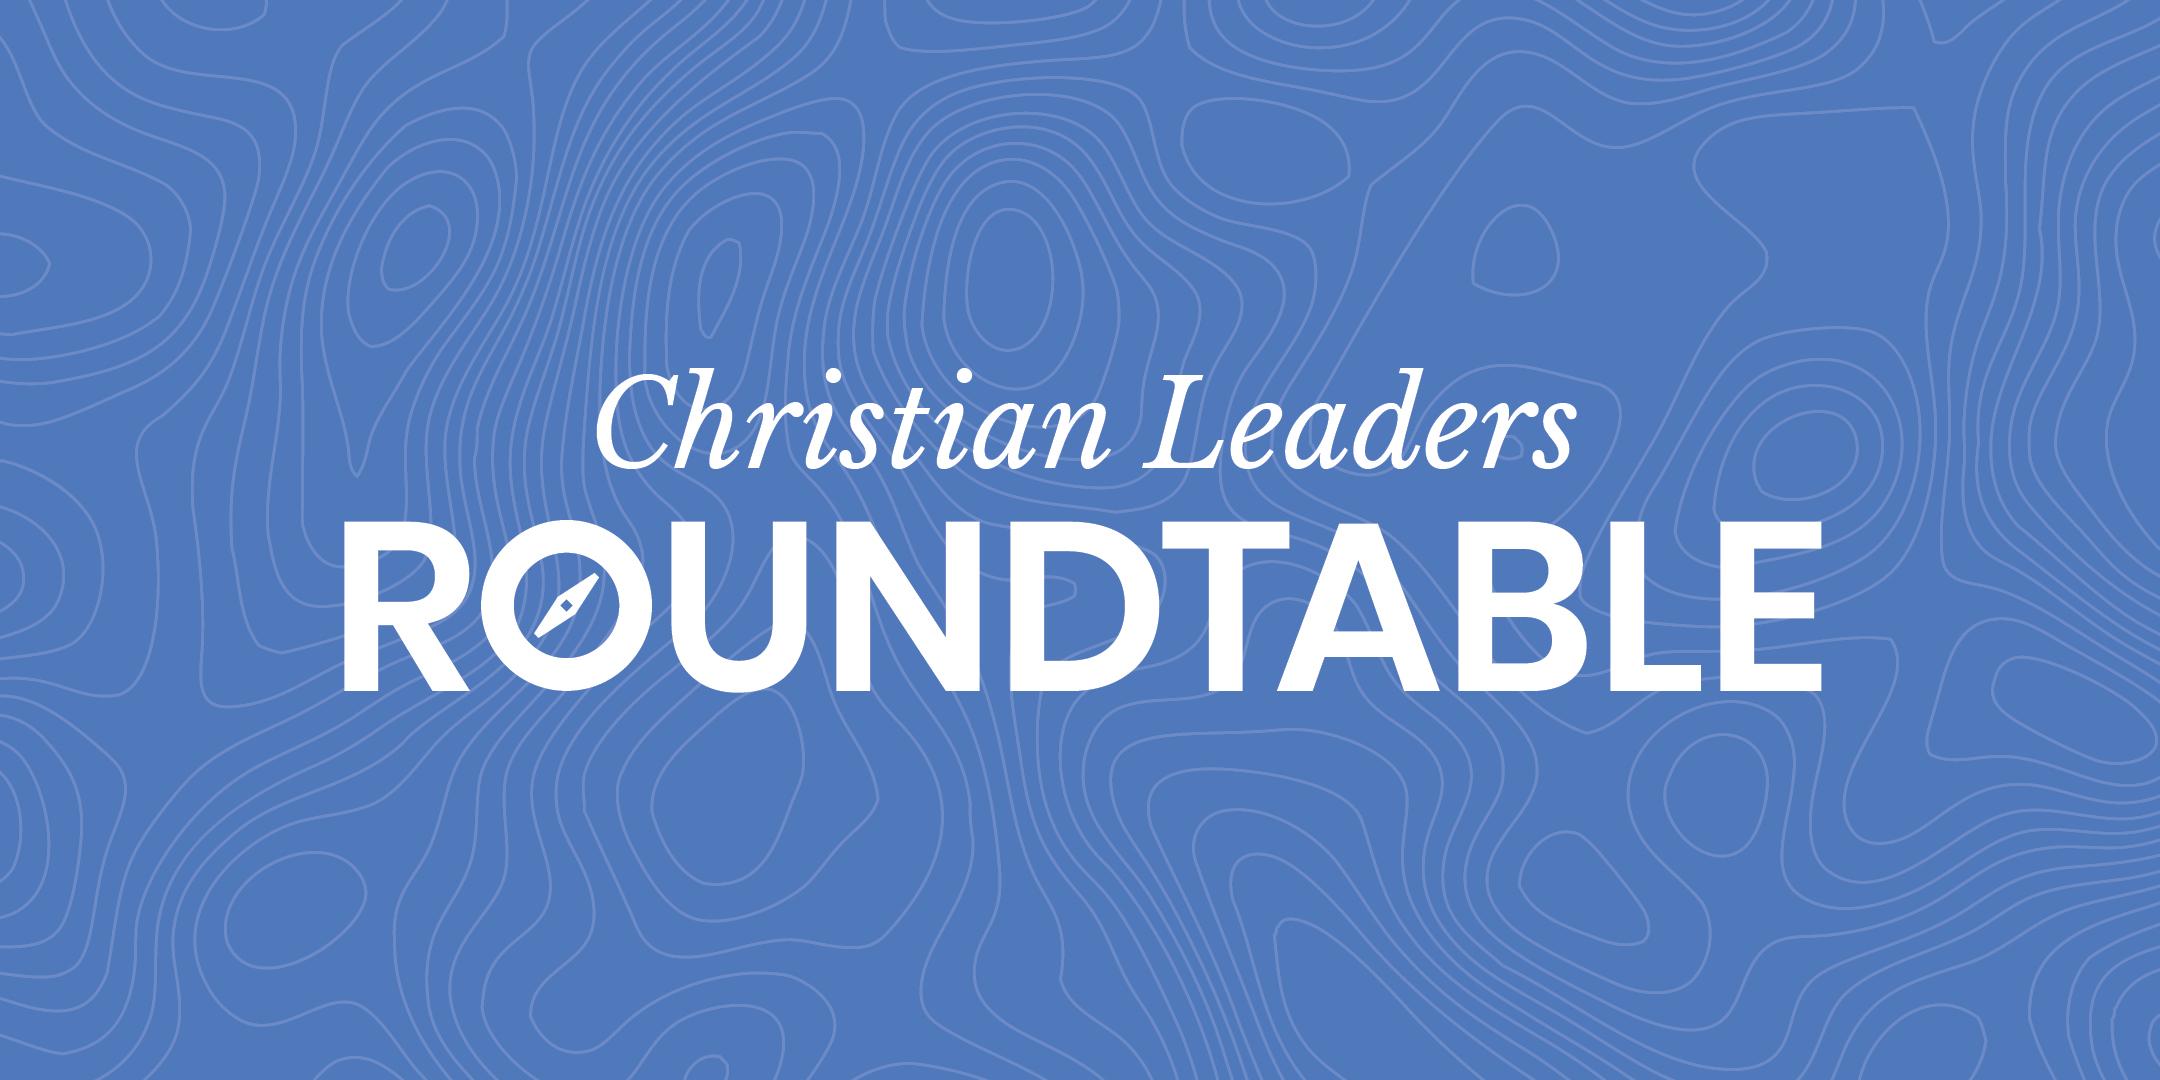 ROUNDTABLE - Lessons Learned from 50 Years in Ministry by Tuck Knupp